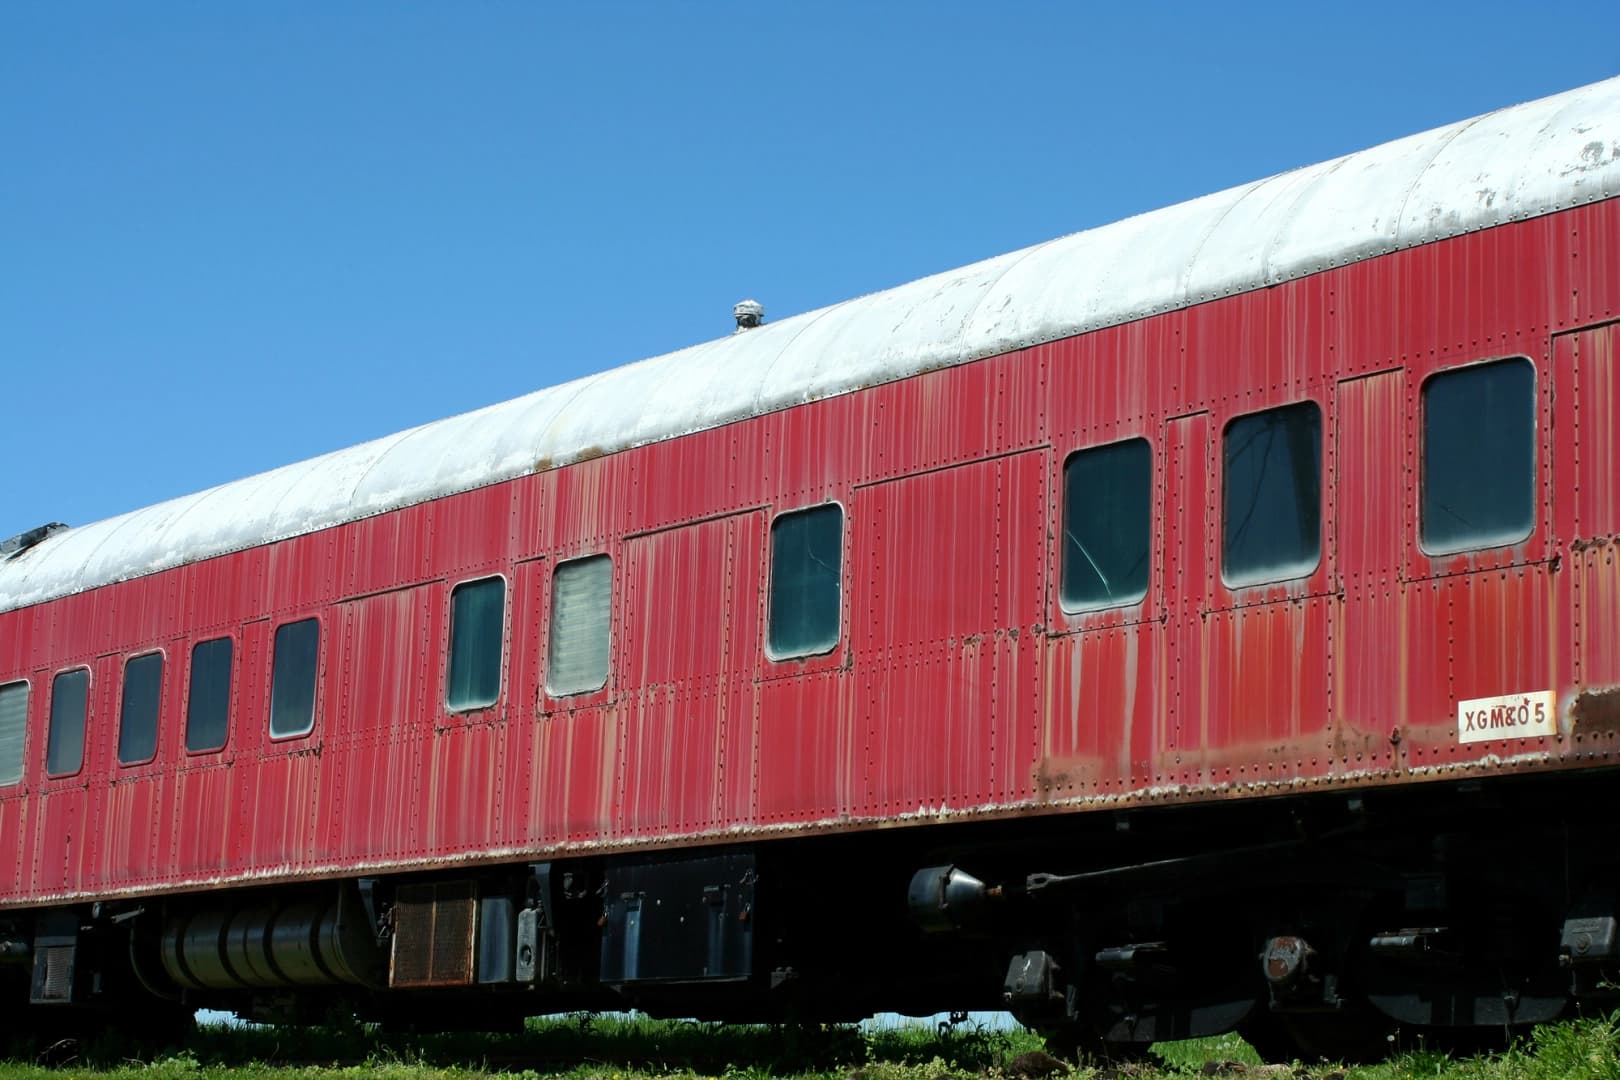 Tennessee Central Railway Museum